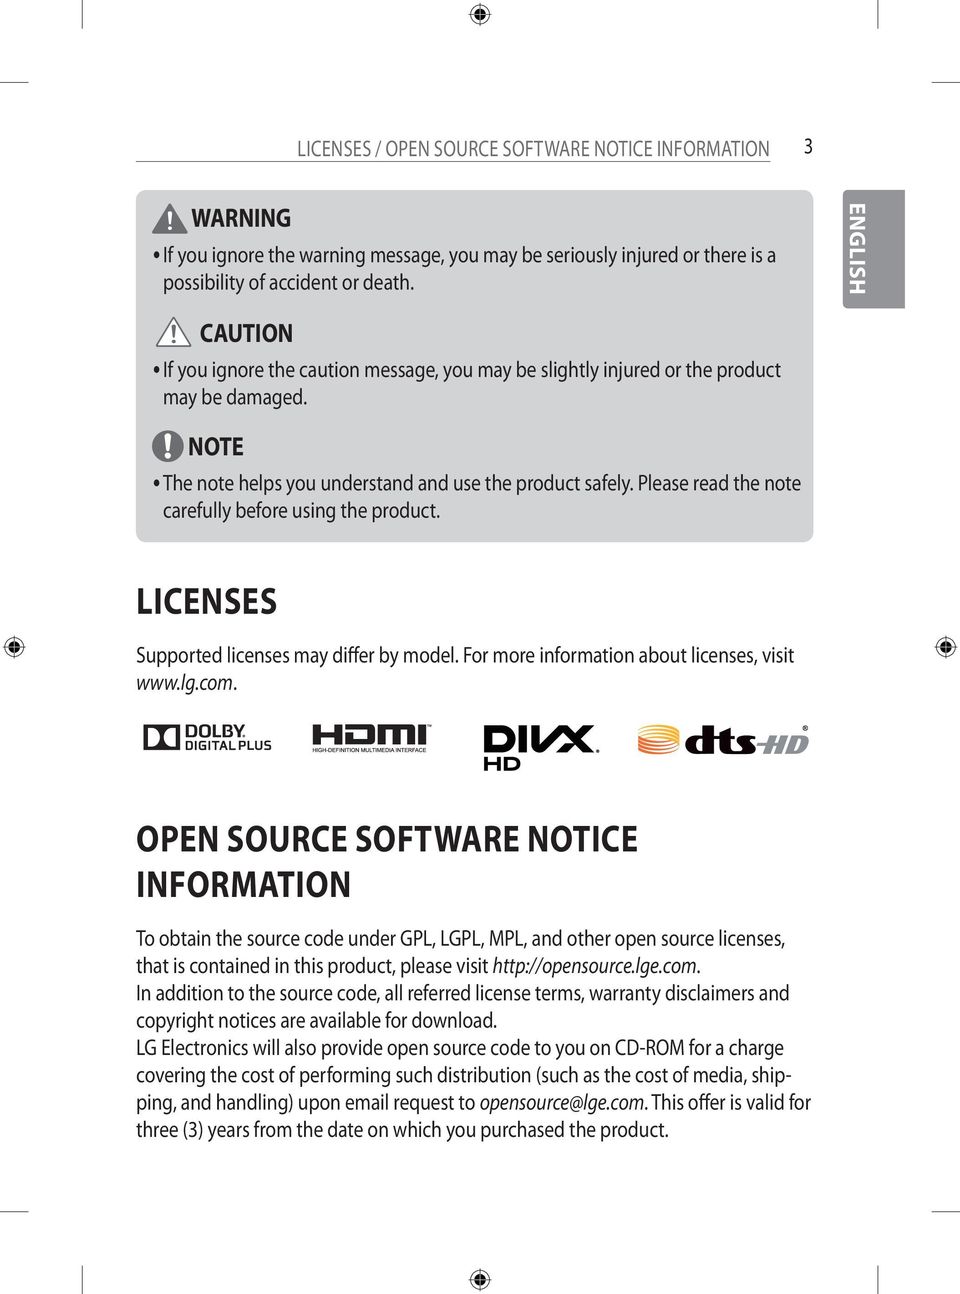 Please read the note carefully before using the product. LICENSES Supported licenses may differ by model. For more information about licenses, visit www.lg.com.